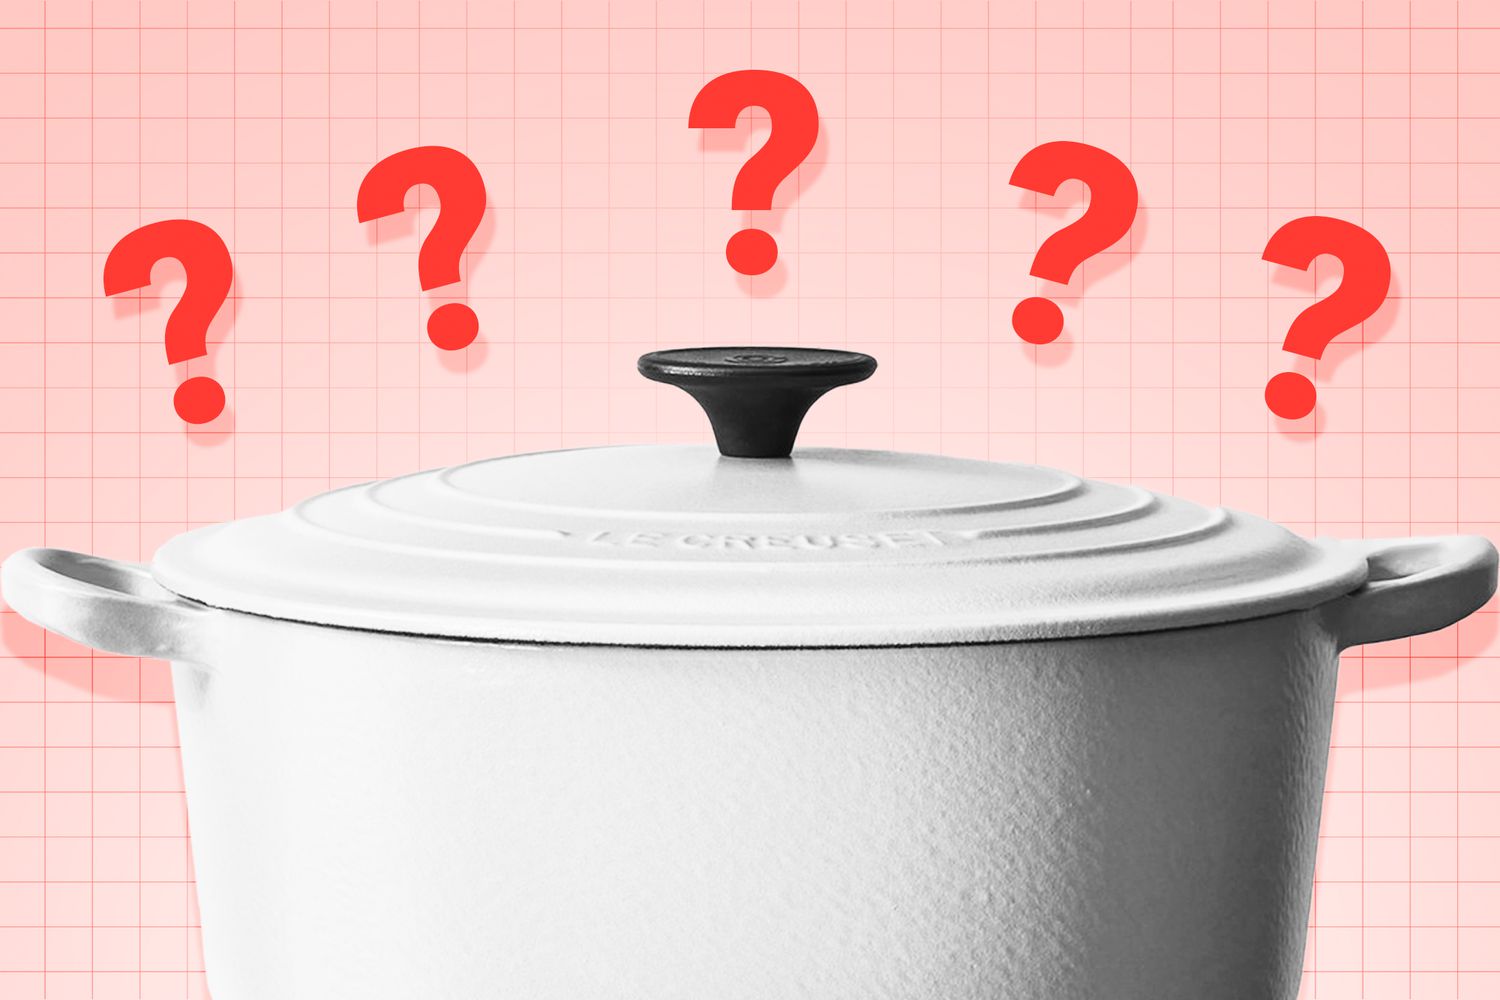 a le Creuset pot in black and white on a designed background with question marks on top